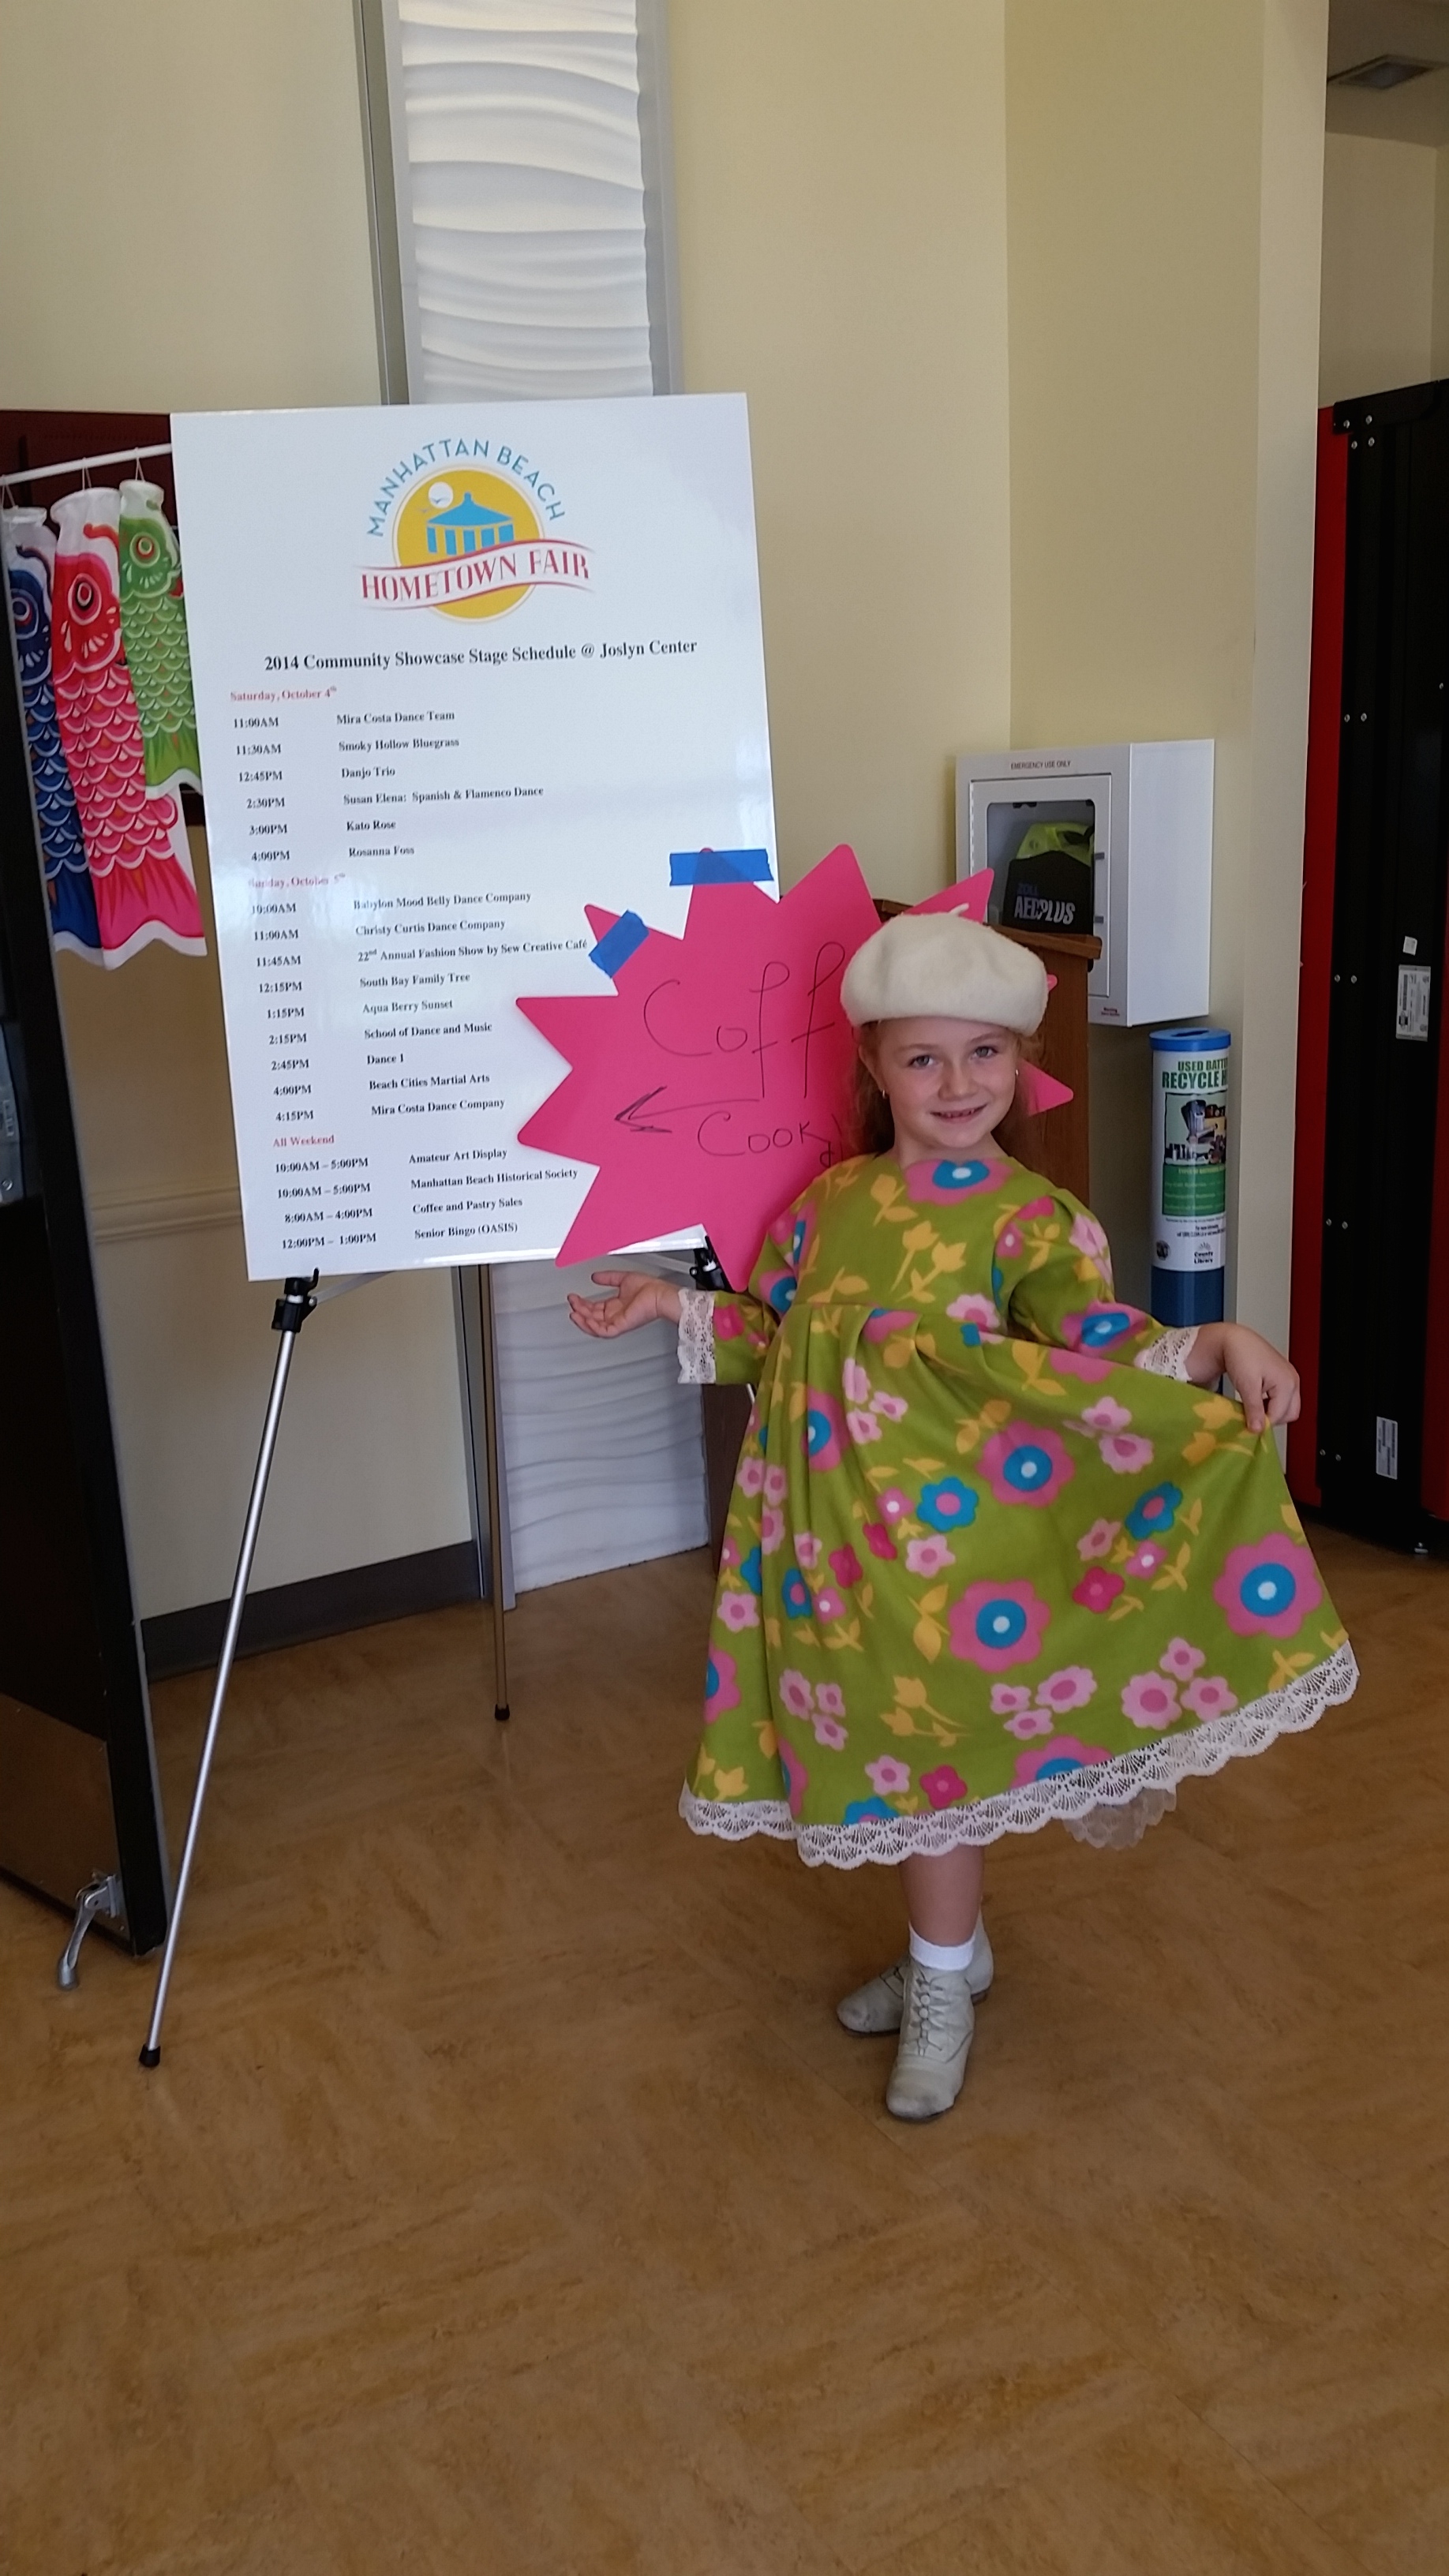 Fall 2014 Hometown Fair. Rosanna's ready to walk the Runway in a dress she made for her Christmas 